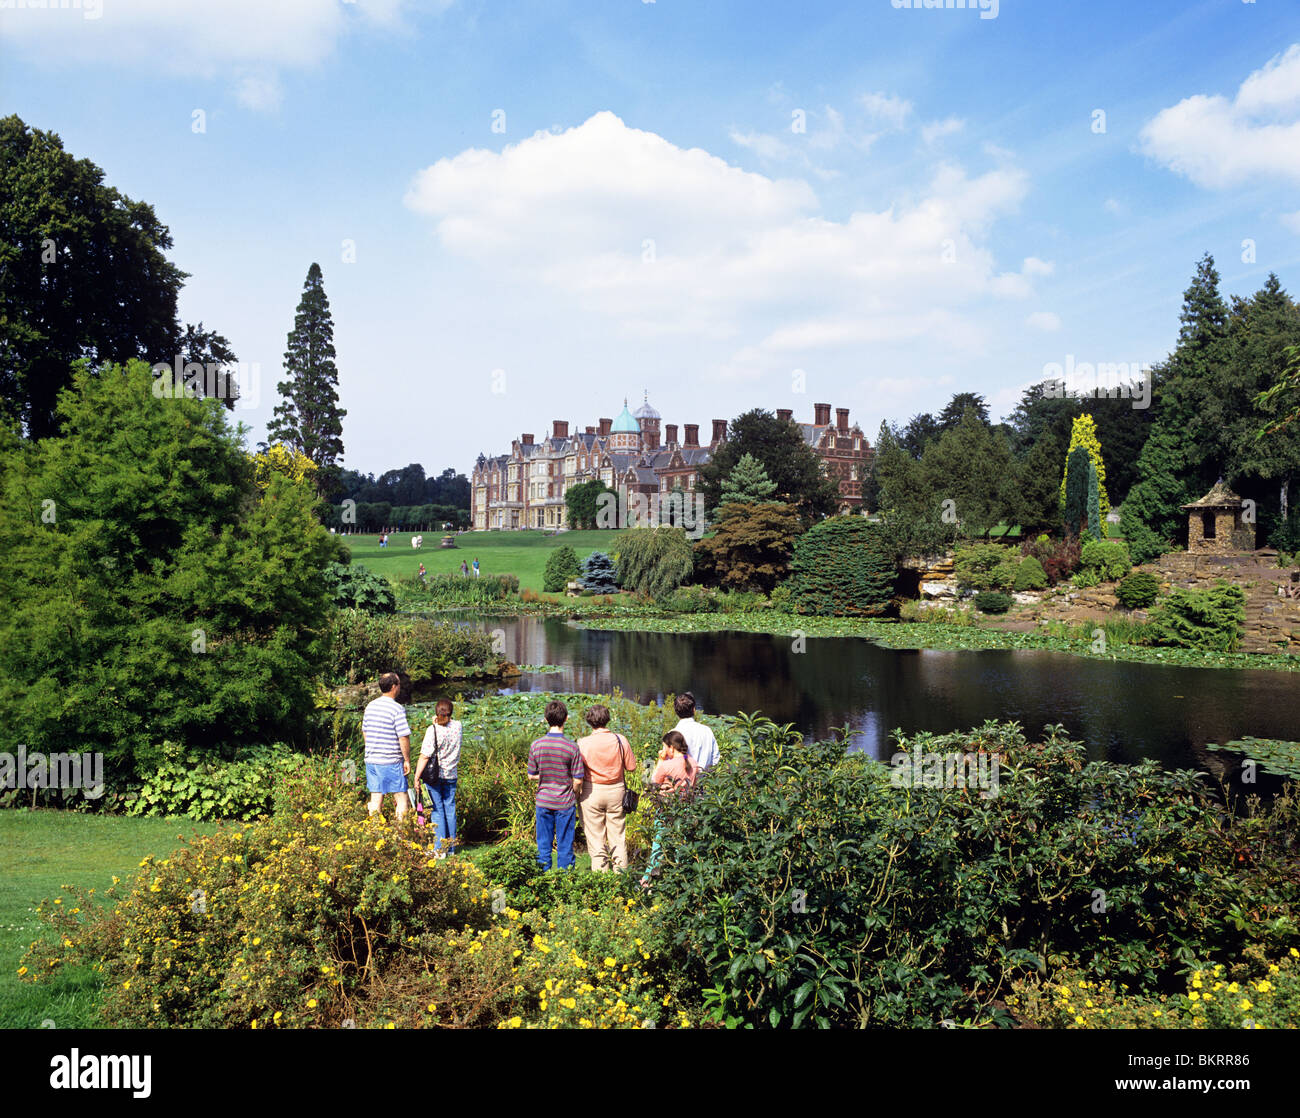 The house and gardens of the Royal residence 'Sandringham House' Stock Photo